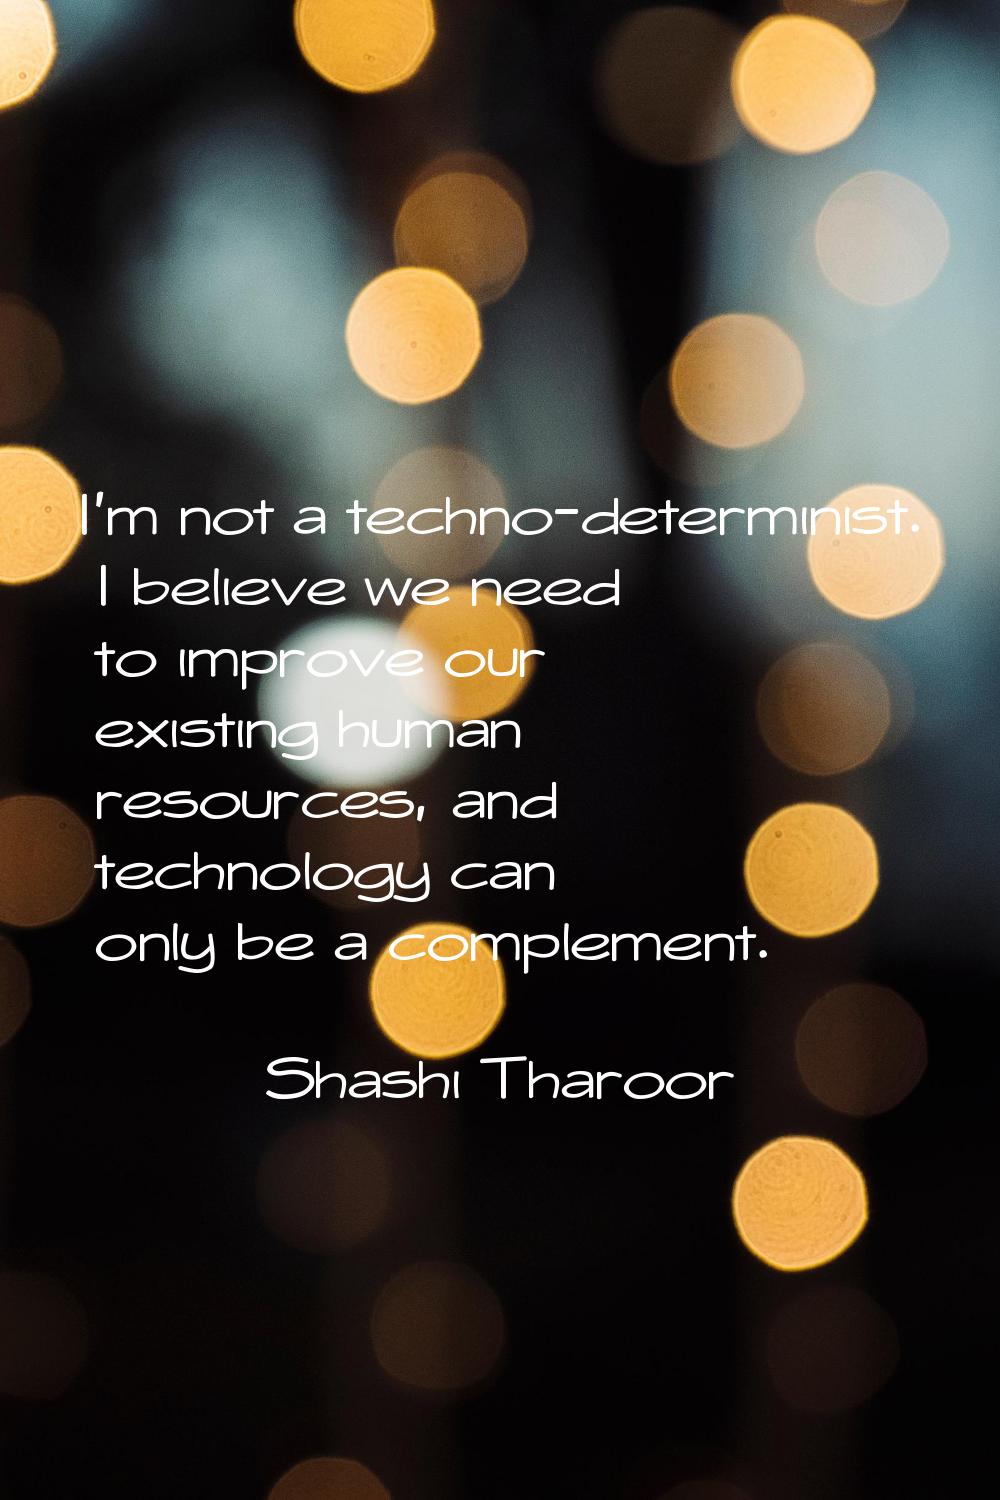 I'm not a techno-determinist. I believe we need to improve our existing human resources, and techno